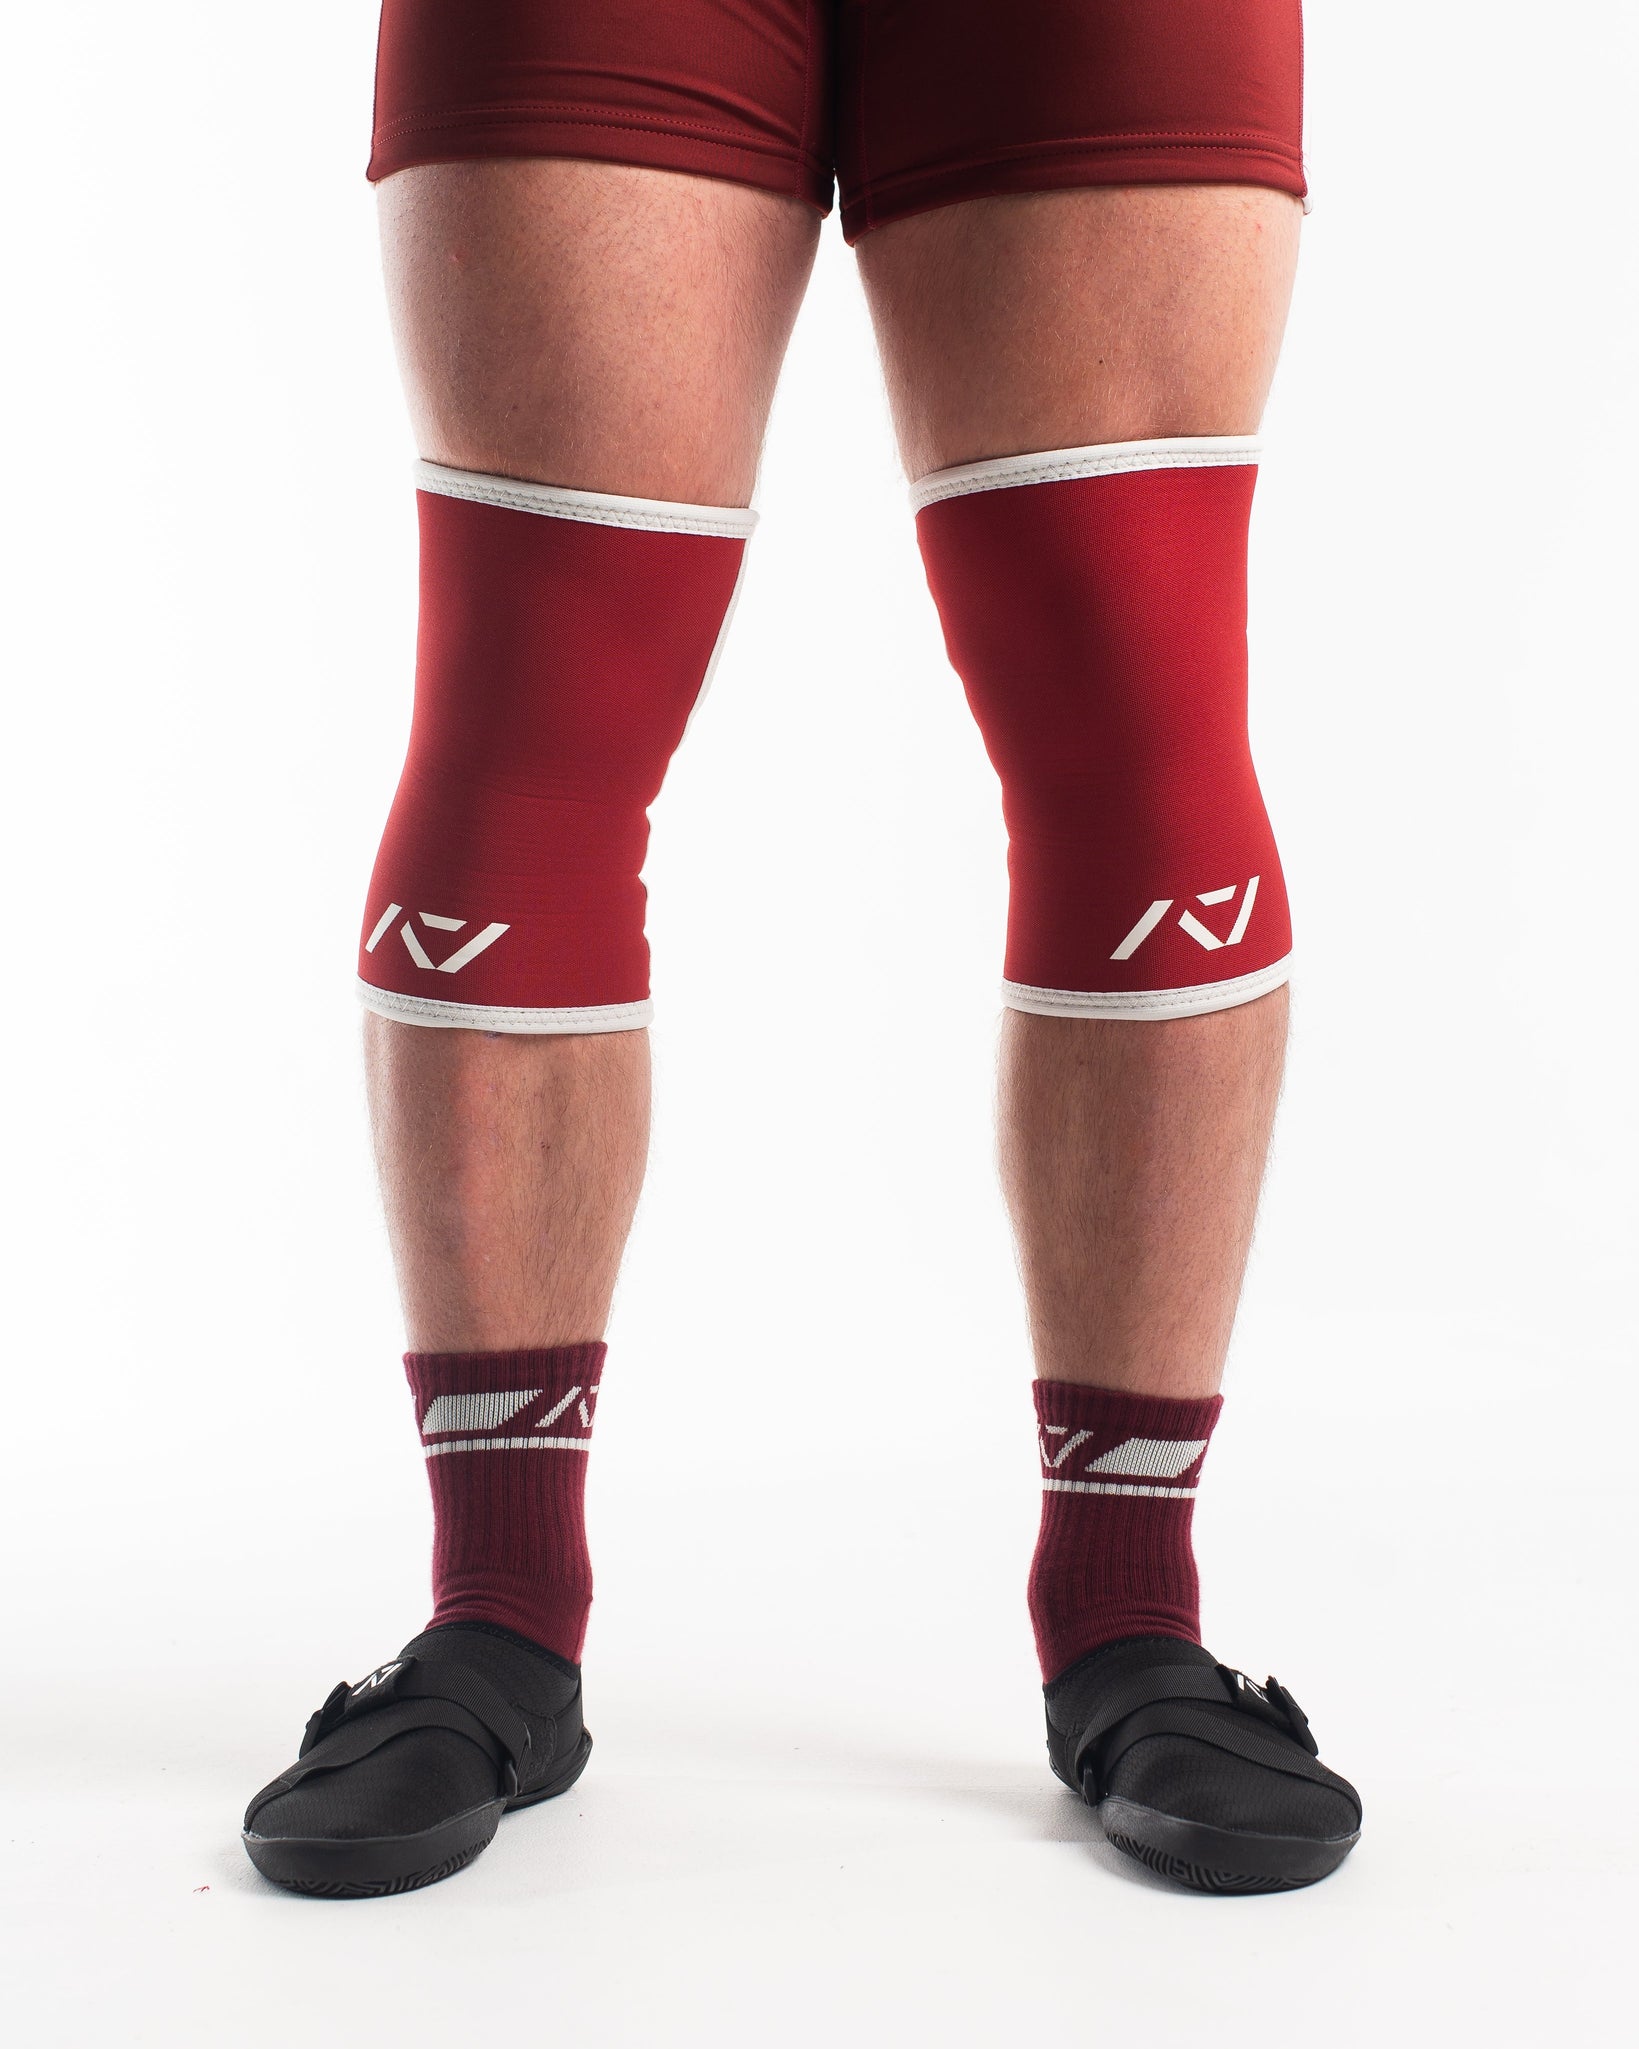 A7 IPF Approved Hourglass Knee Sleeves feature an hourglass-shaped centre taper fit to help provide knee compression while maintaining proper tightness around the calf and quad, offered in three stiffnesses (Flexi, Stiff and Rigor Mortis). Shop the full A7 Powerlifting IPF Approved Equipment collection. The IPF Approved Kit includes Powerlifting Singlet, A7 Meet Shirt, A7 Zebra Wrist Wraps and A7 Deadlift Socks. Genouill�res powerlifting shipping to France, Spain, Ireland, Germany, Italy, Sweden and EU.